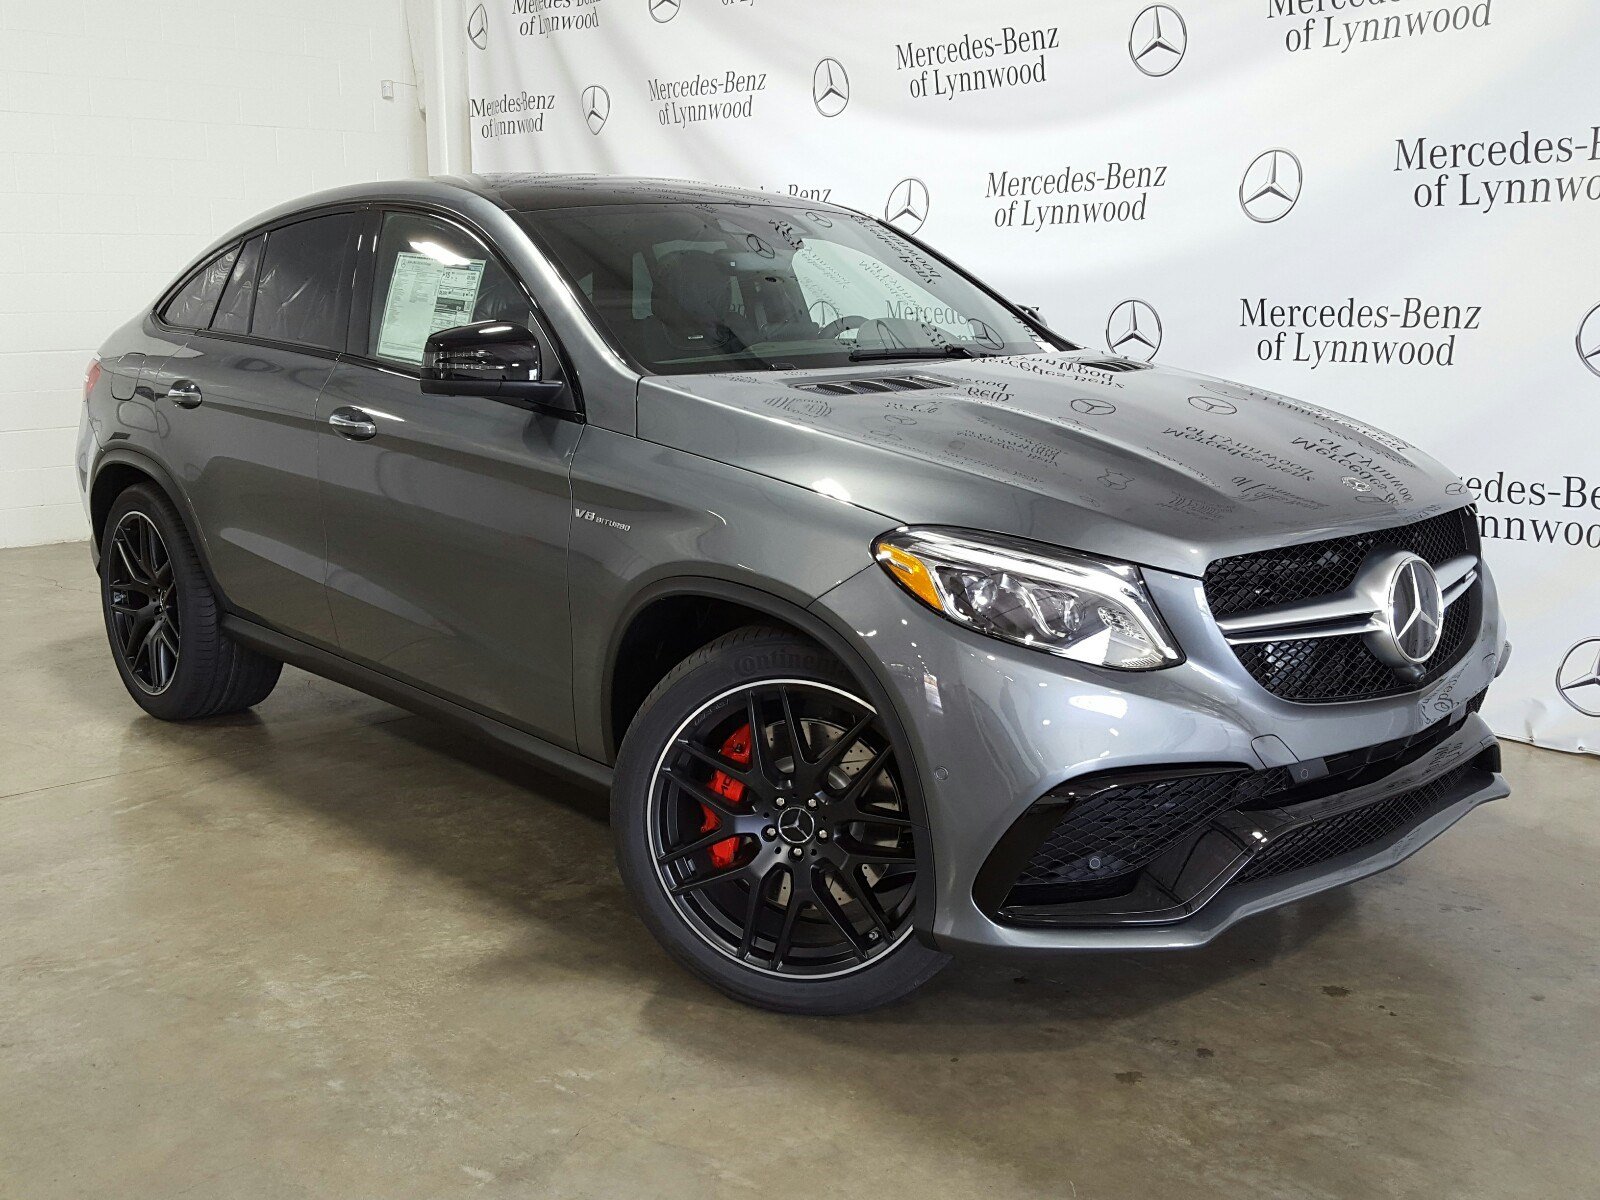 New 2019 Mercedes Benz Amg Gle 63 S 4matic Coupe